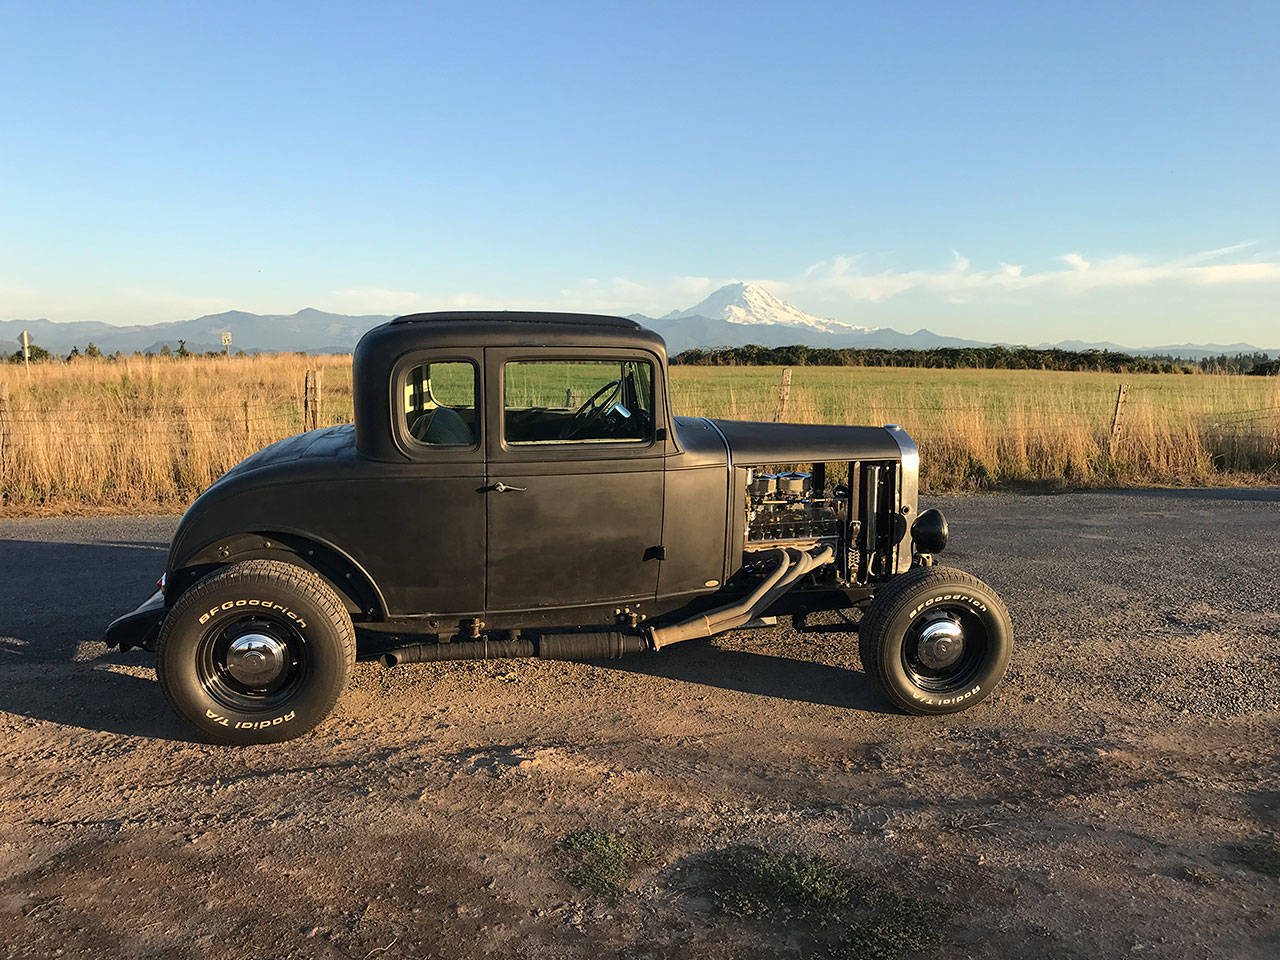 White River High alum Bill “Bunky” Nicoletta has signed up his 1932 Chevreolet Coup for the Motorsport Club’s annual car show. Photo curtesy Bill Nicoletta